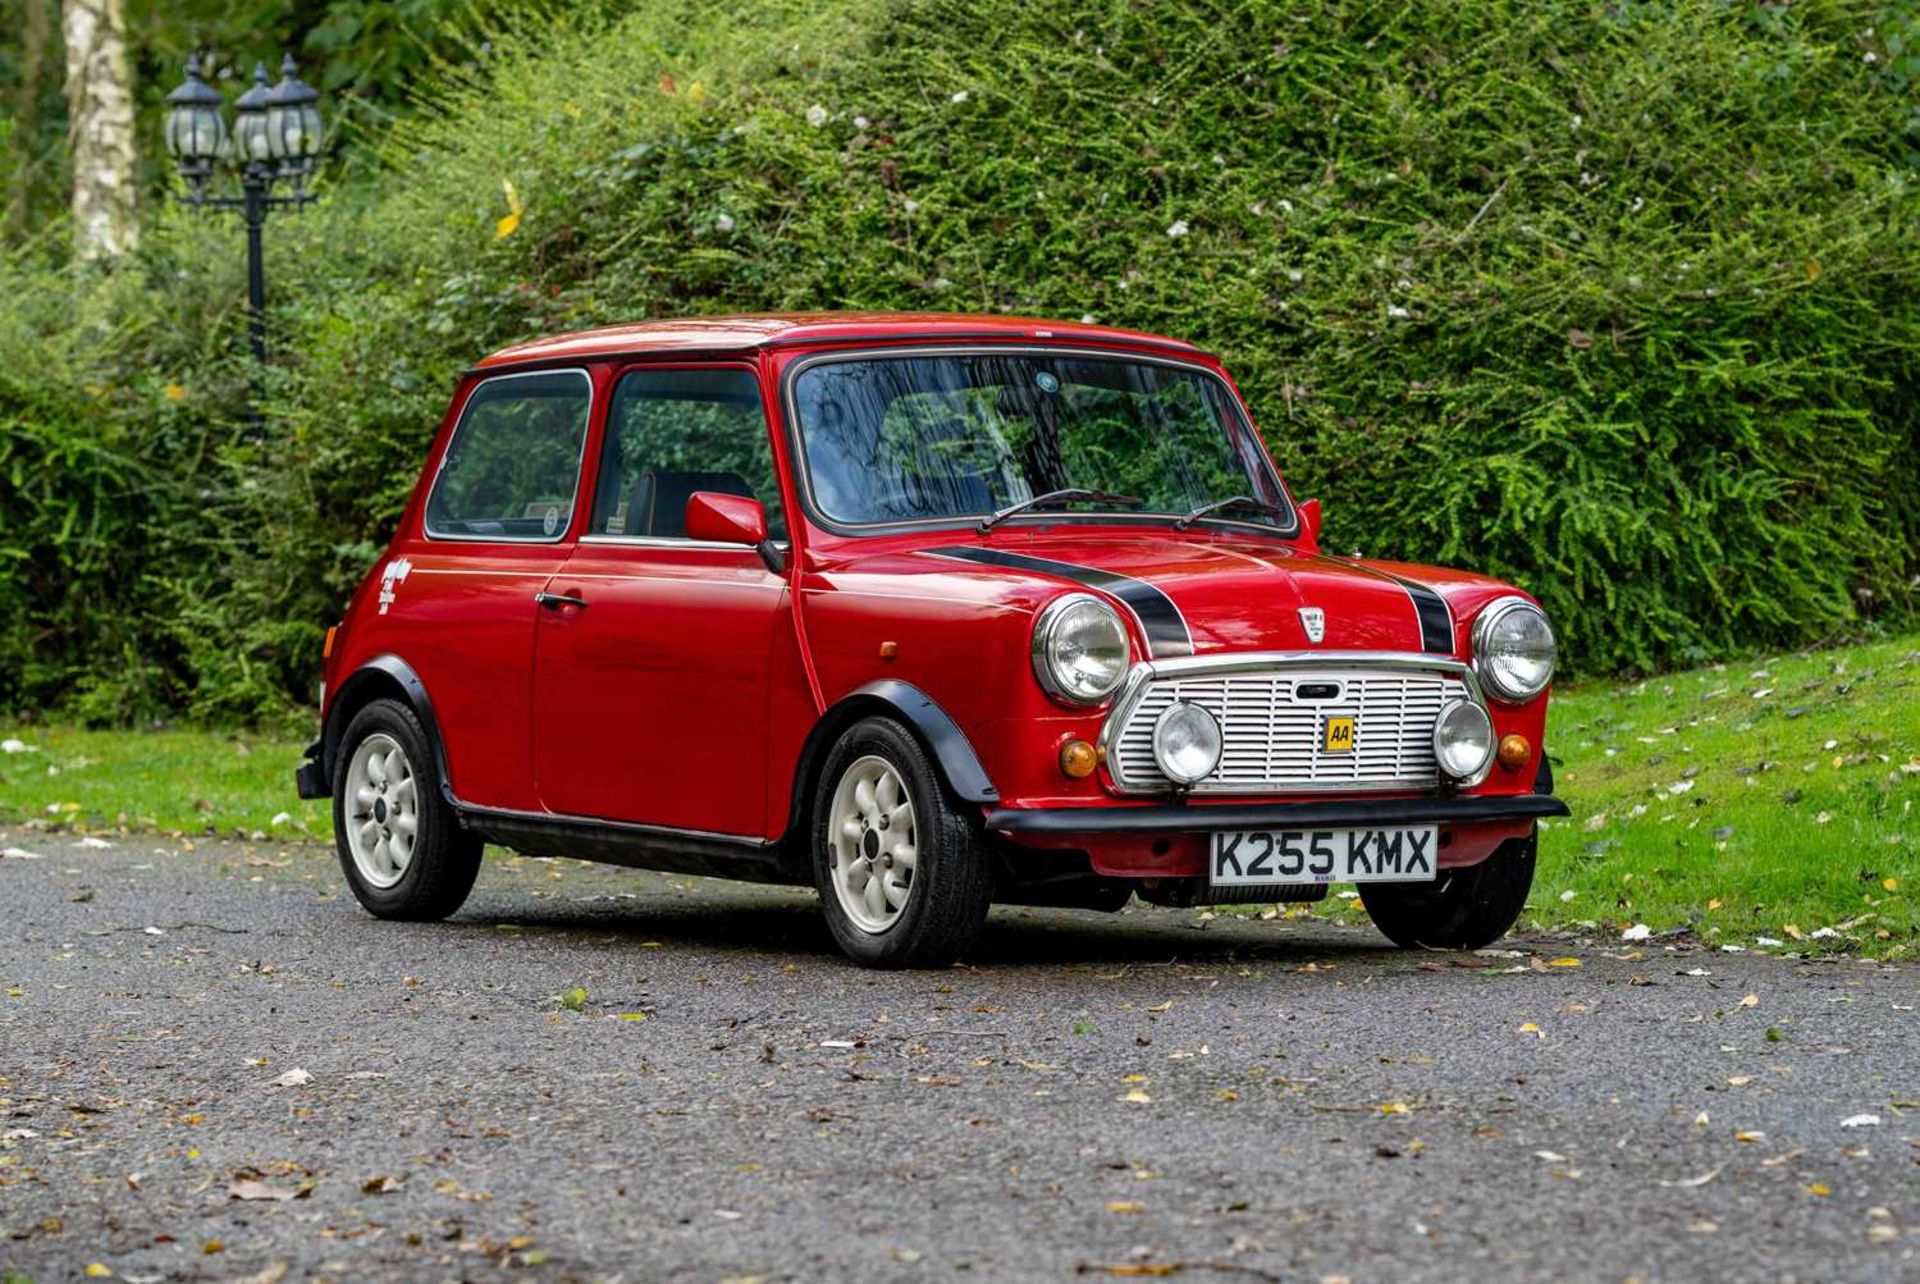 1993 Mini Italian Job Edition ***NO RESERVE*** One of 153 thought to remain on UK roads, from the Br